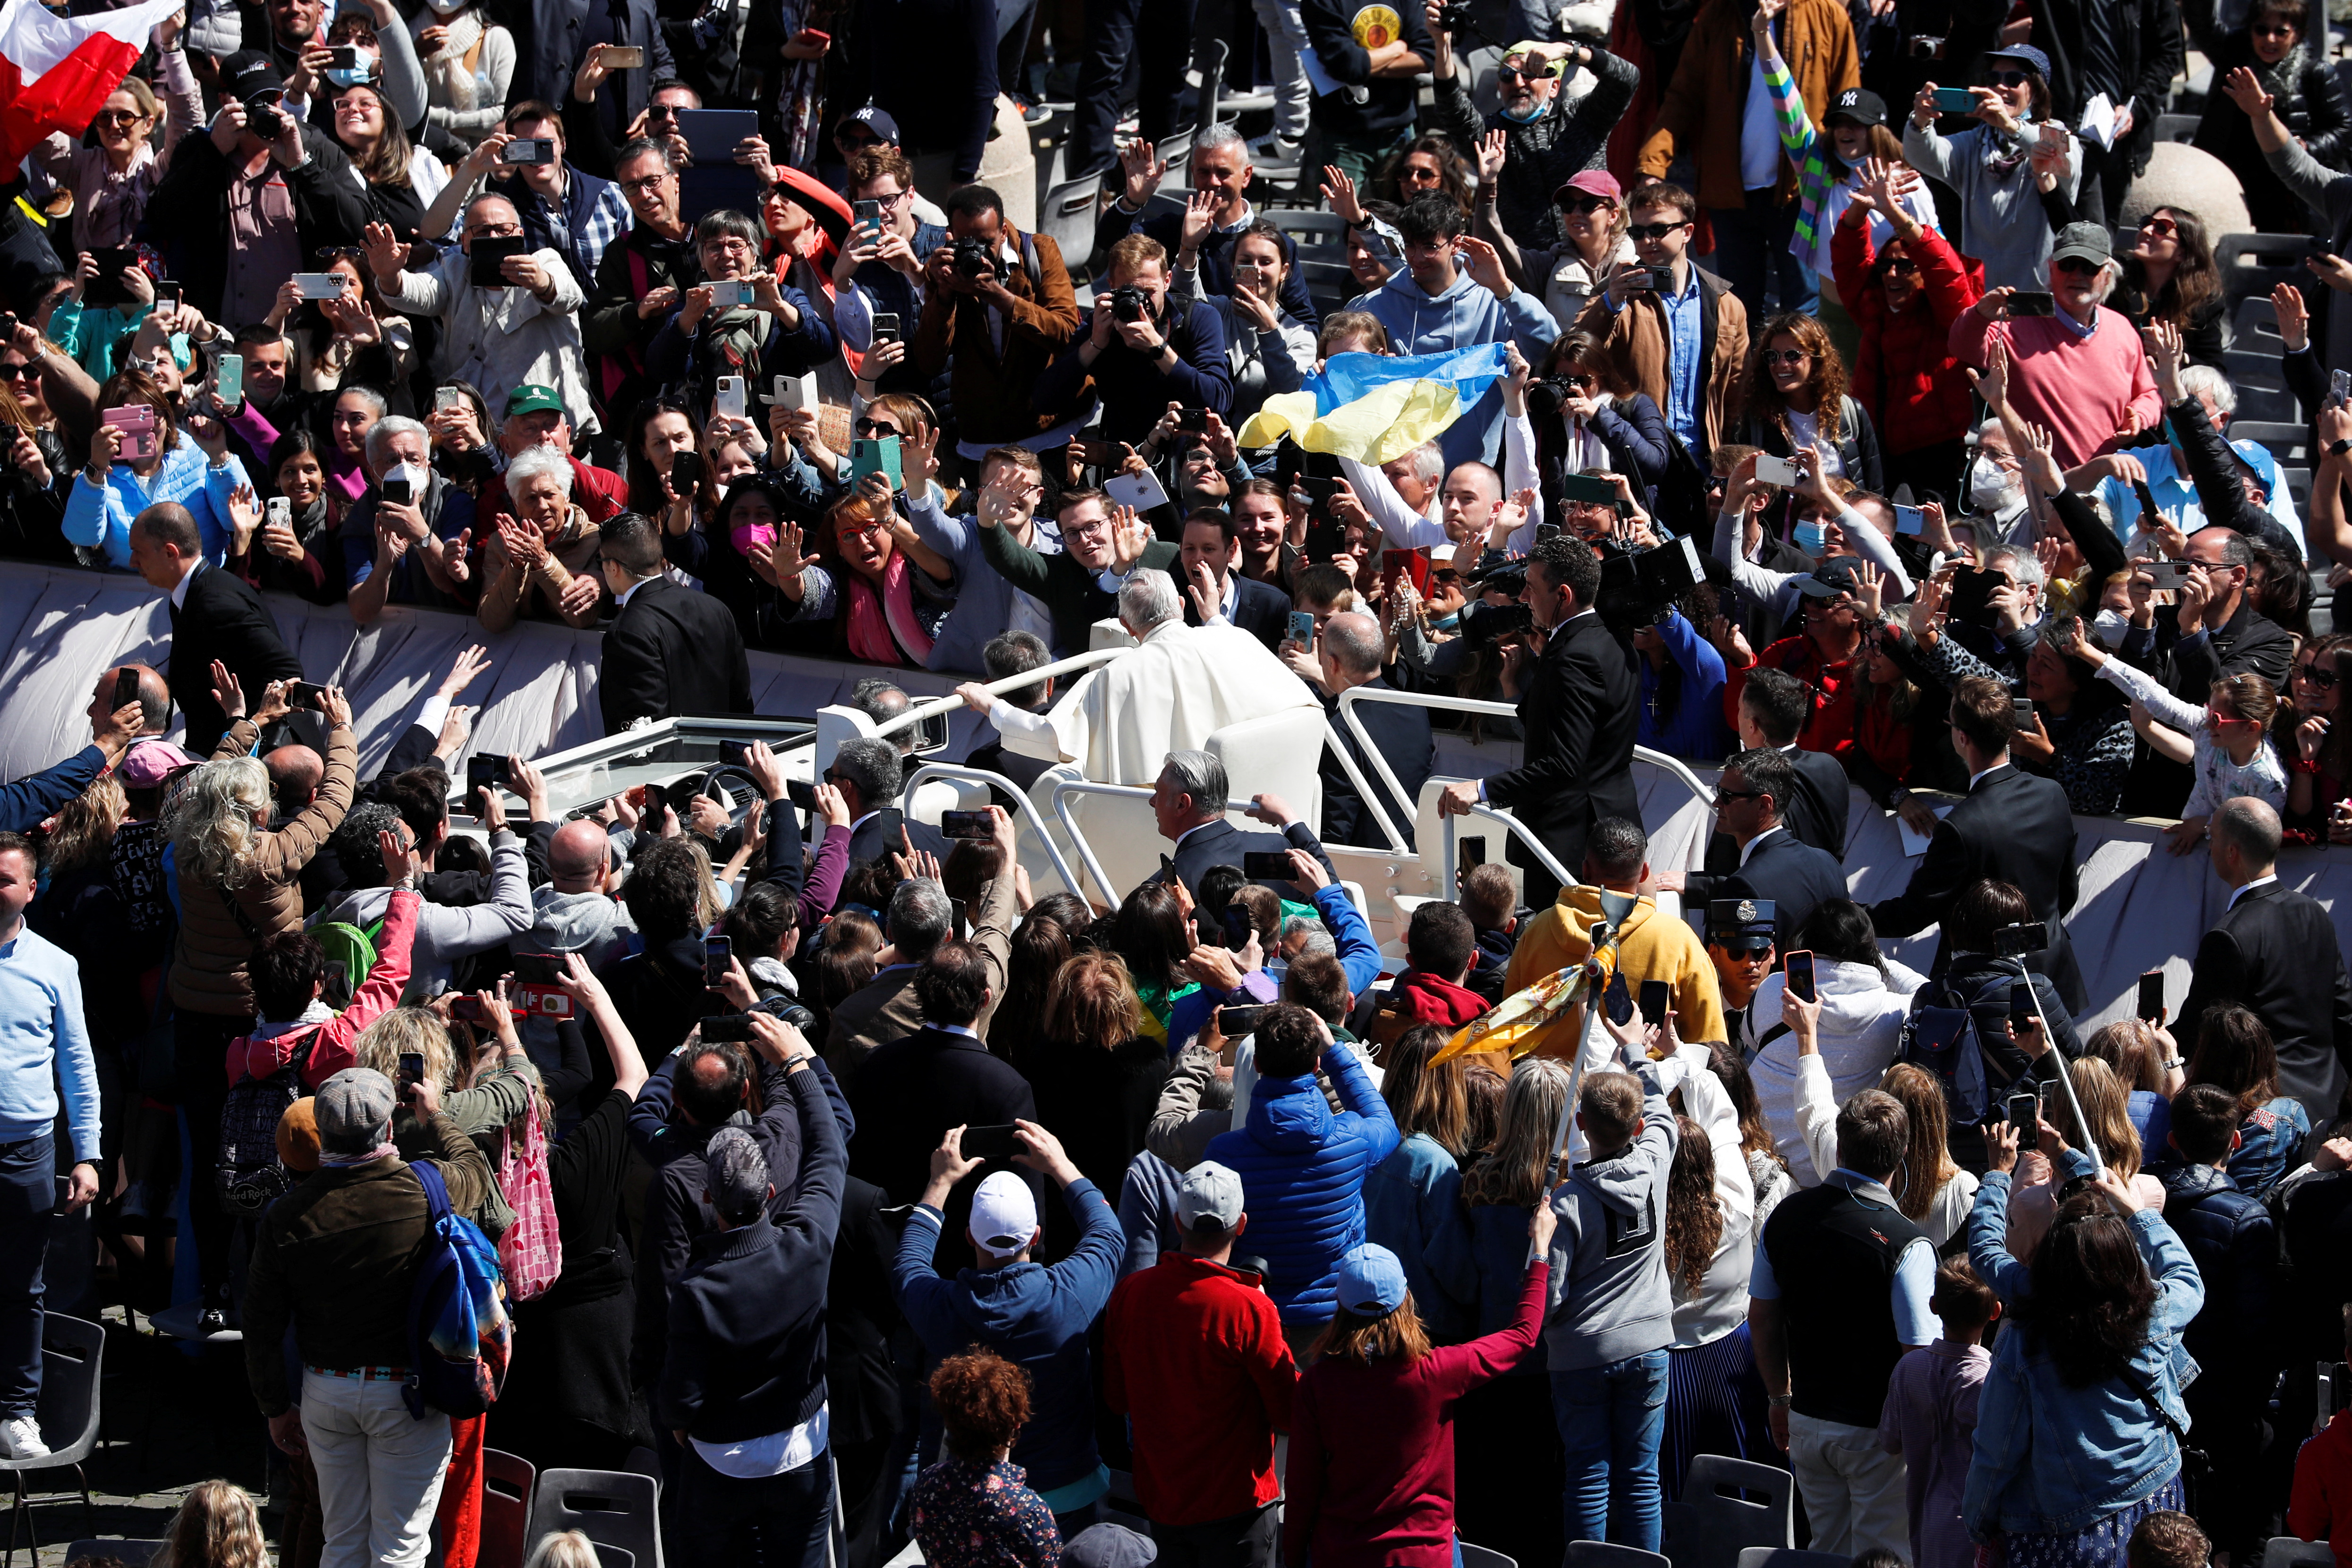 Pope Francis toured Saint Peter's Square in his popemobile